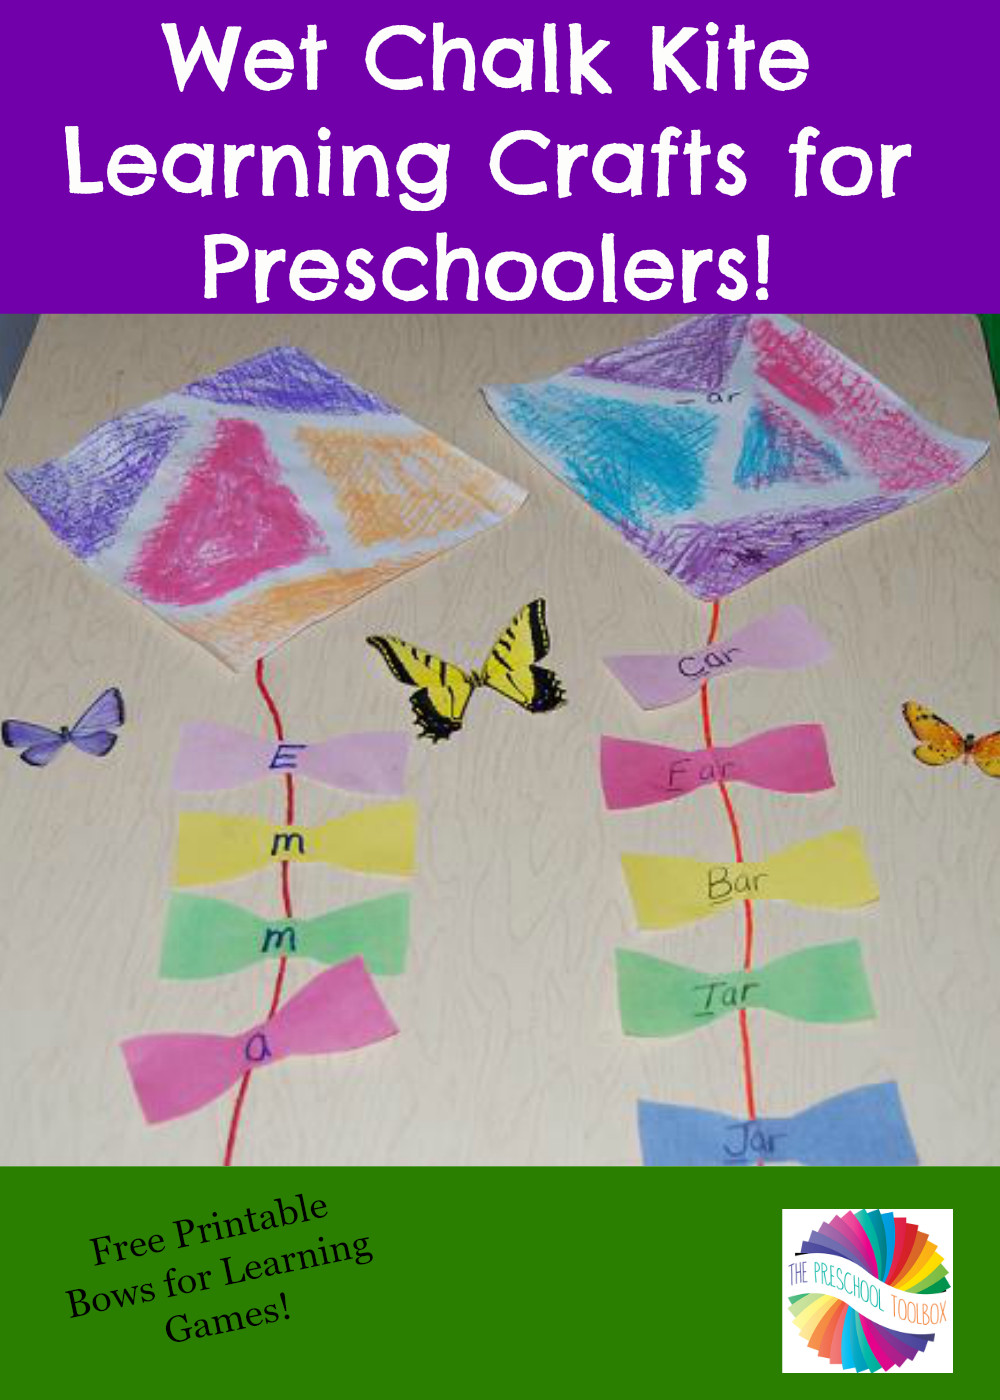 A Crafts For Preschoolers
 Wet Chalk Kite Crafts and Learning Games for Young Kids